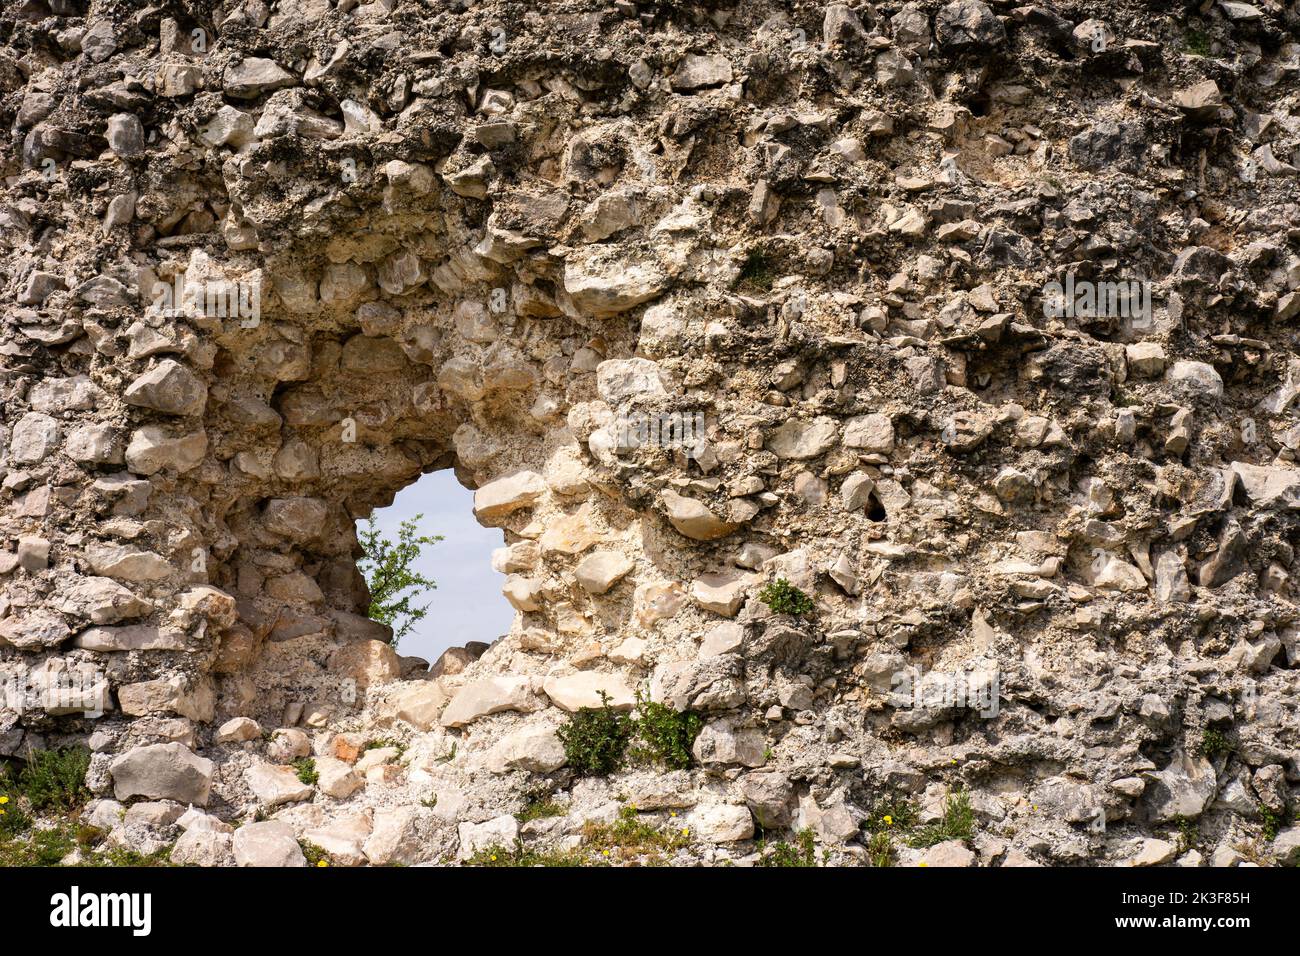 Remains of a hole blasted with a cannon, located in Paklenica, Croatia. Stock Photo